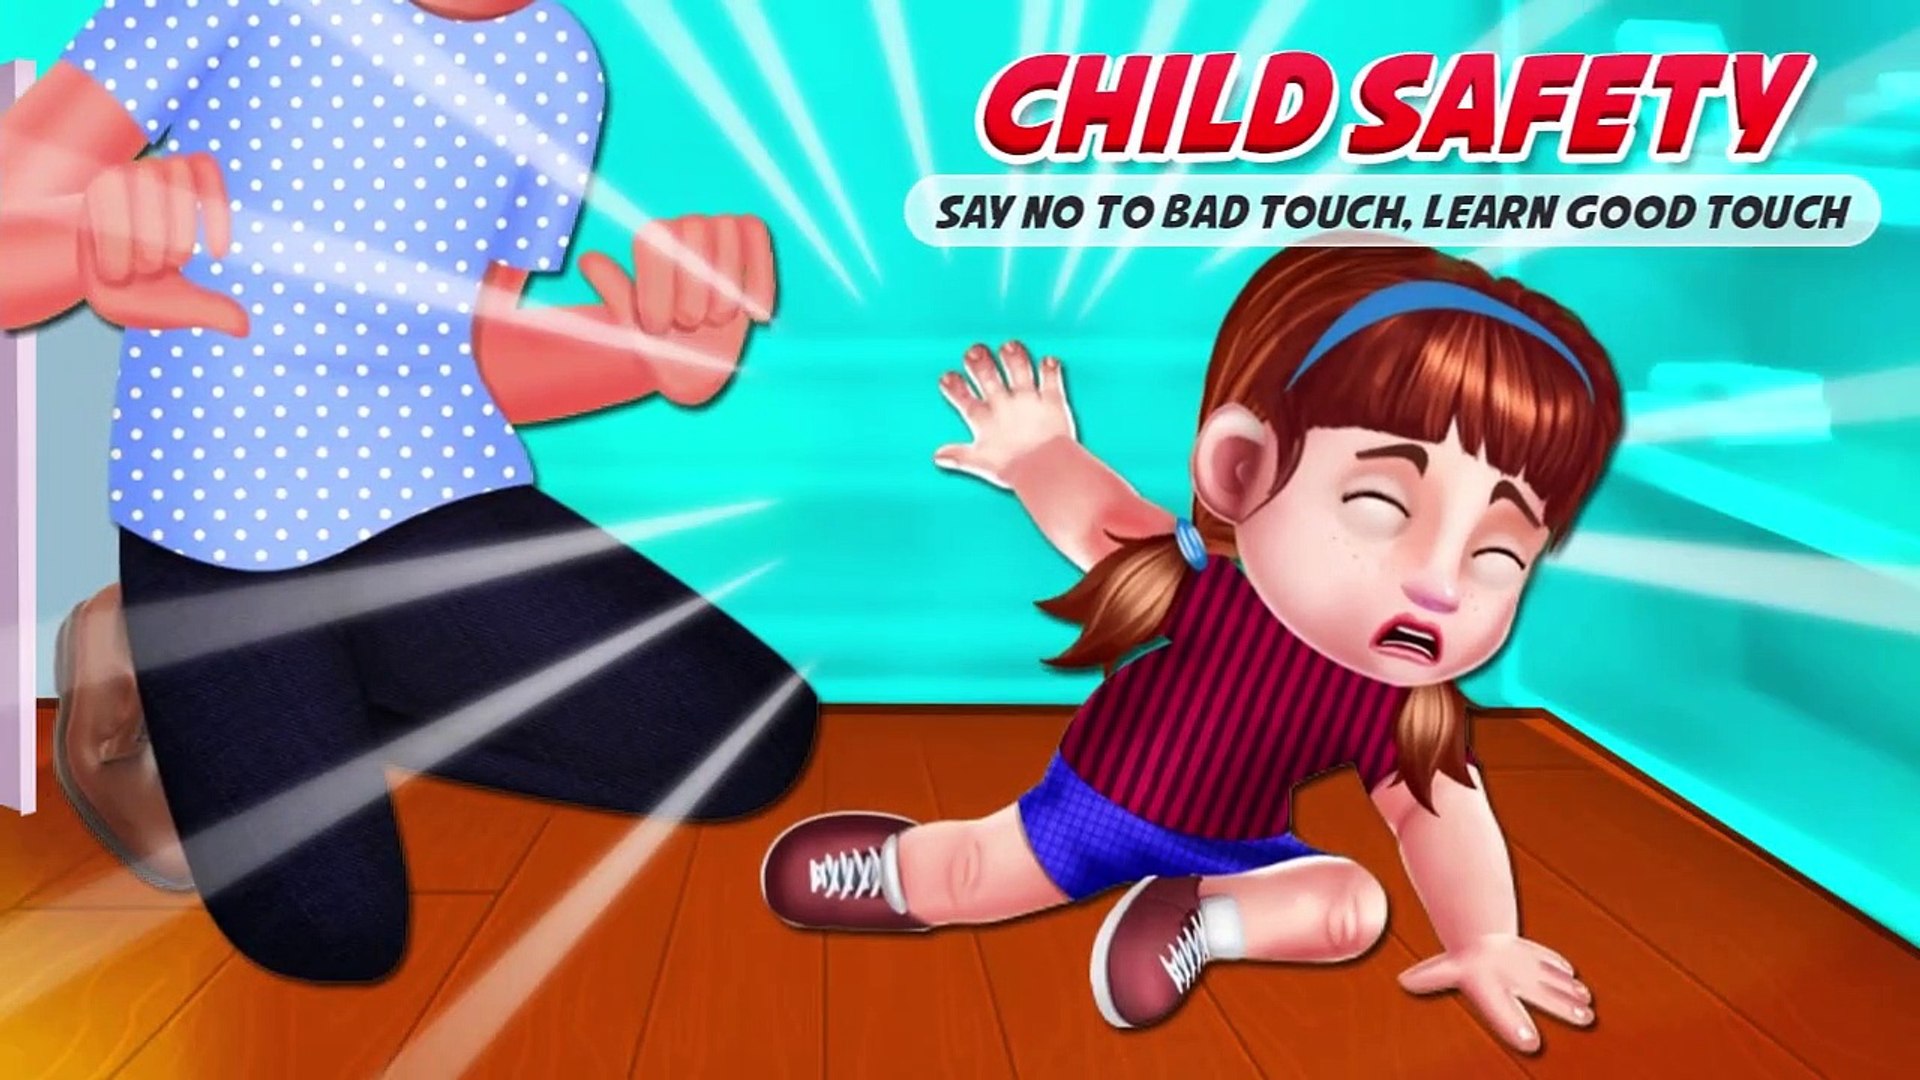 Child Safety Say No To Bad Touch, Learn Good Touch - Safety Learning Game -  video Dailymotion